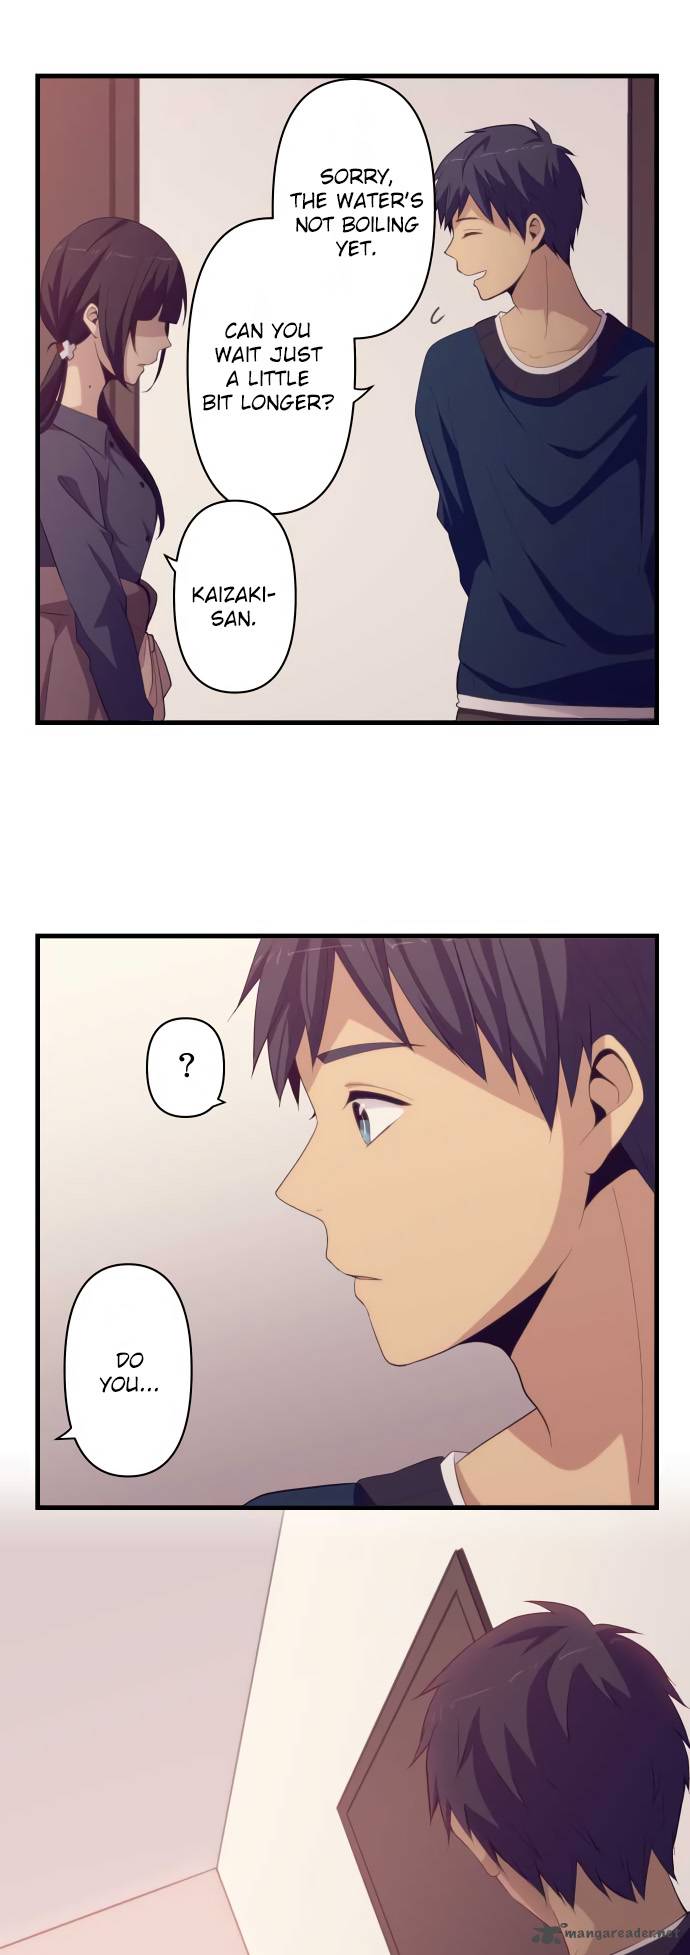 Relife 184 17